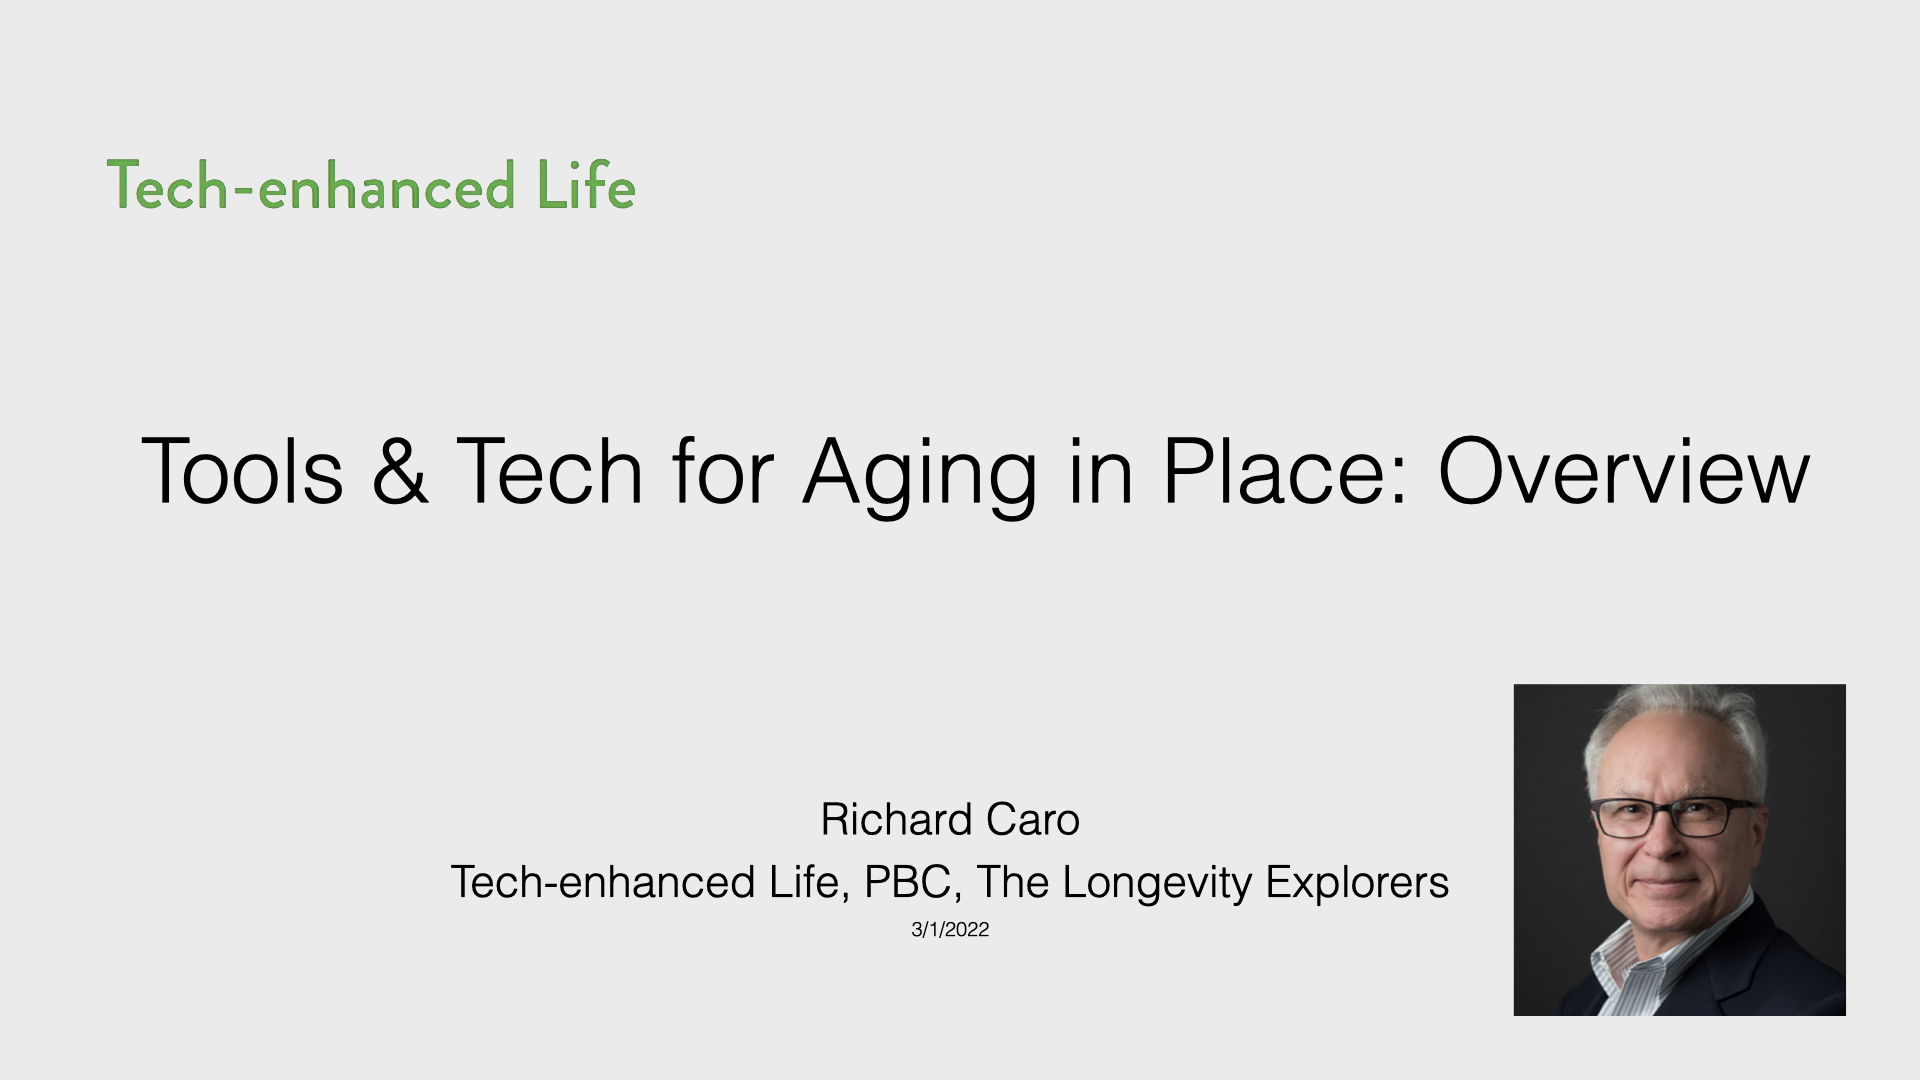 Technology for Aging in Place